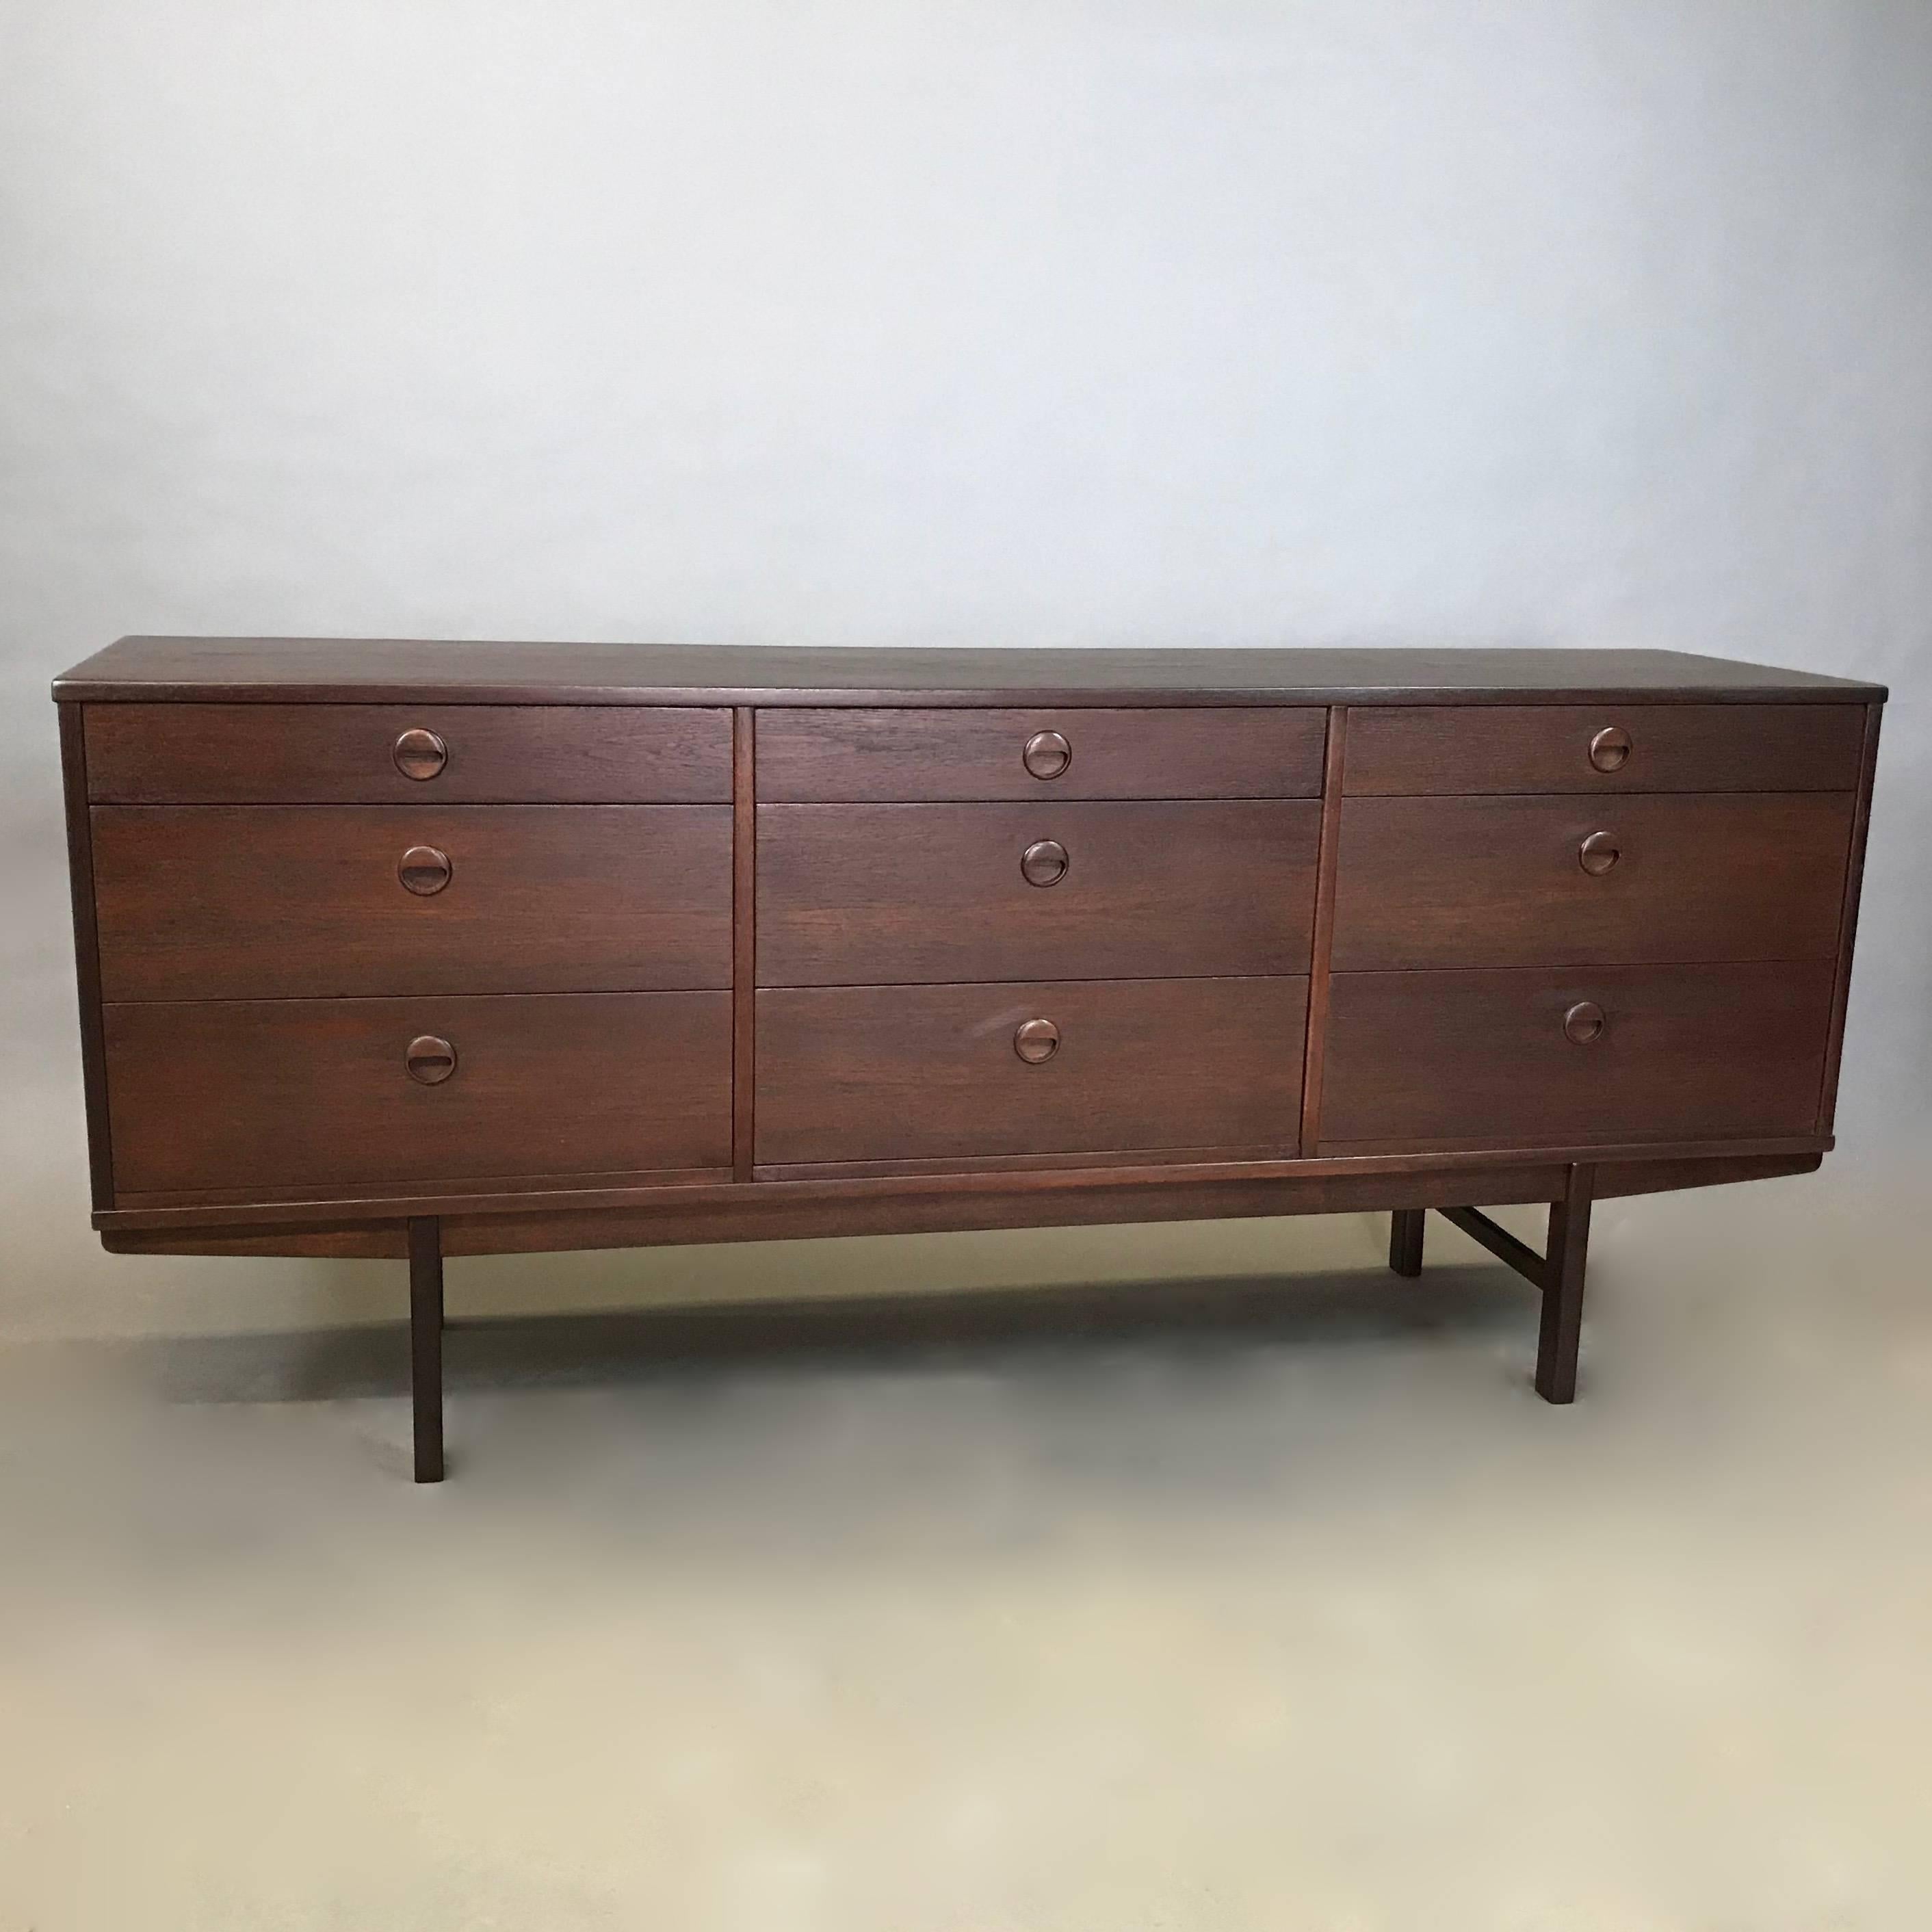 Danish modern, credenza, sideboard by Folke Ohlsson for DUX features his signature recessed pulls on it's nine drawers and is newly restored in a stunning dark teak finish. The top left drawer is divided and felt lined for silverware but this